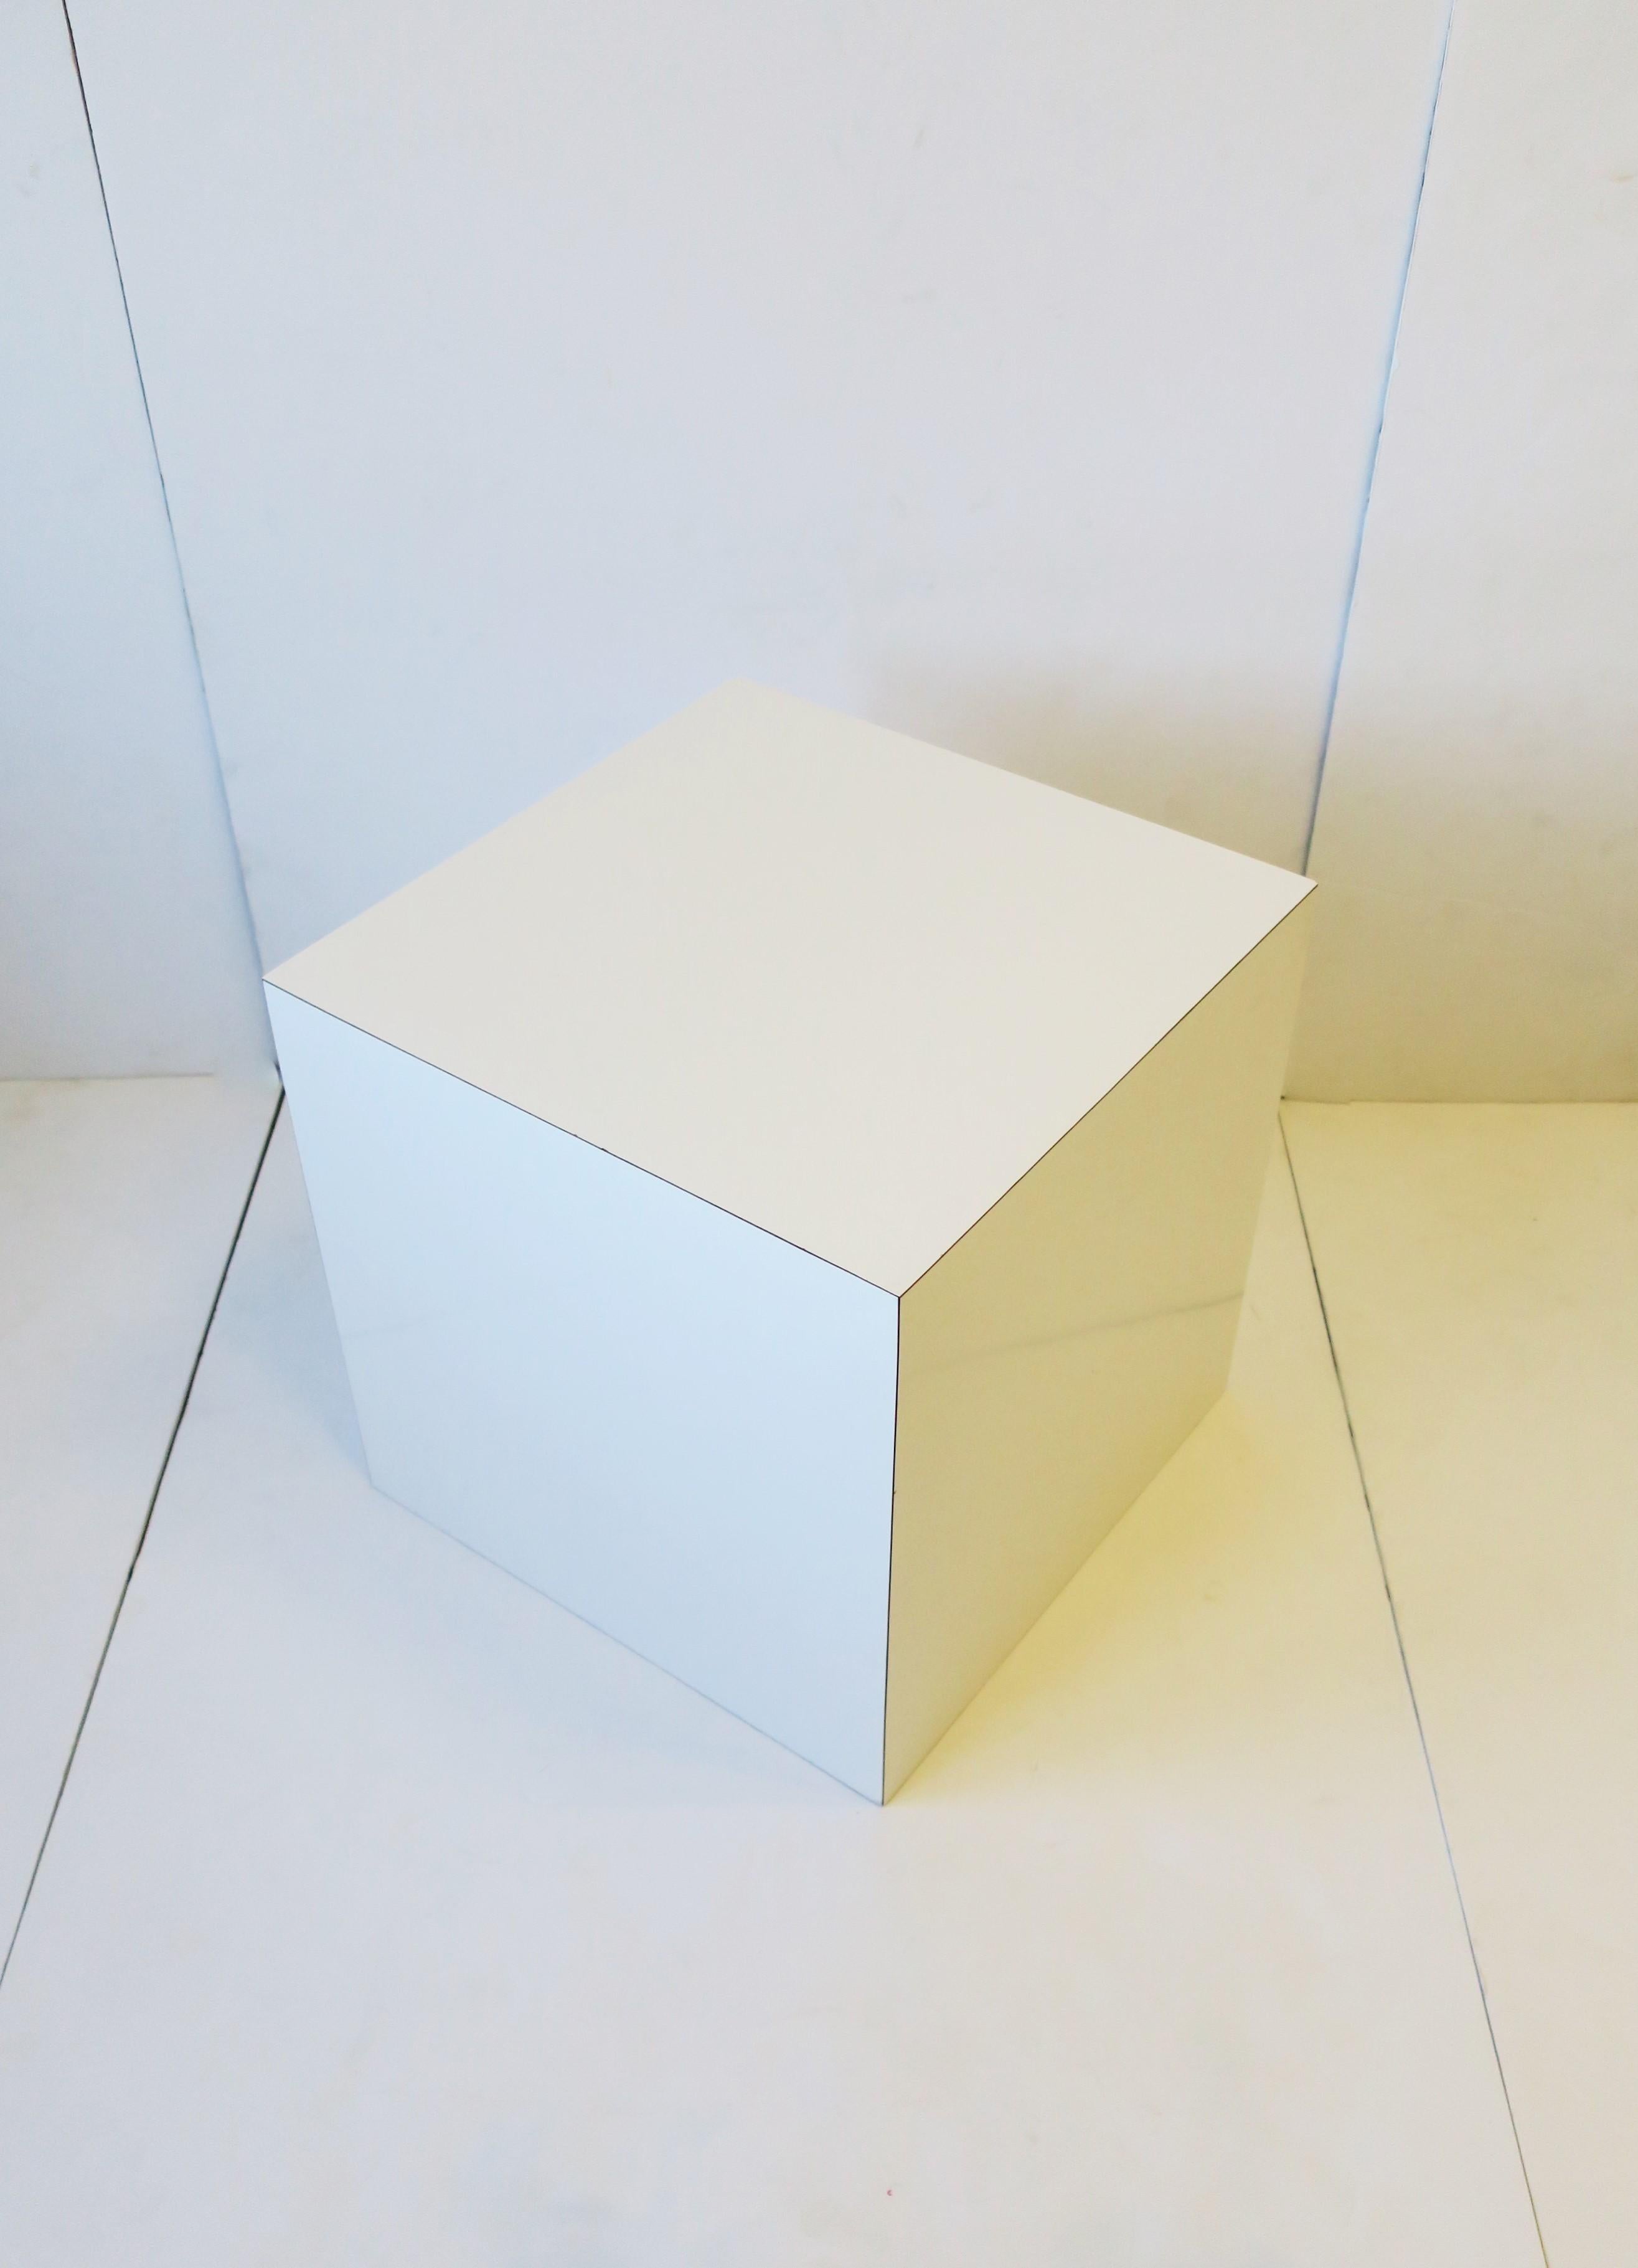 A white gloss laminate veneered pedestal or cube end table, '70s Modern/Postmodern period, circa late-20th century, 1970s or later. A great piece for sculpture, art, display, or as a pedestal cube end table, nightstand table, etc., as demonstrated.